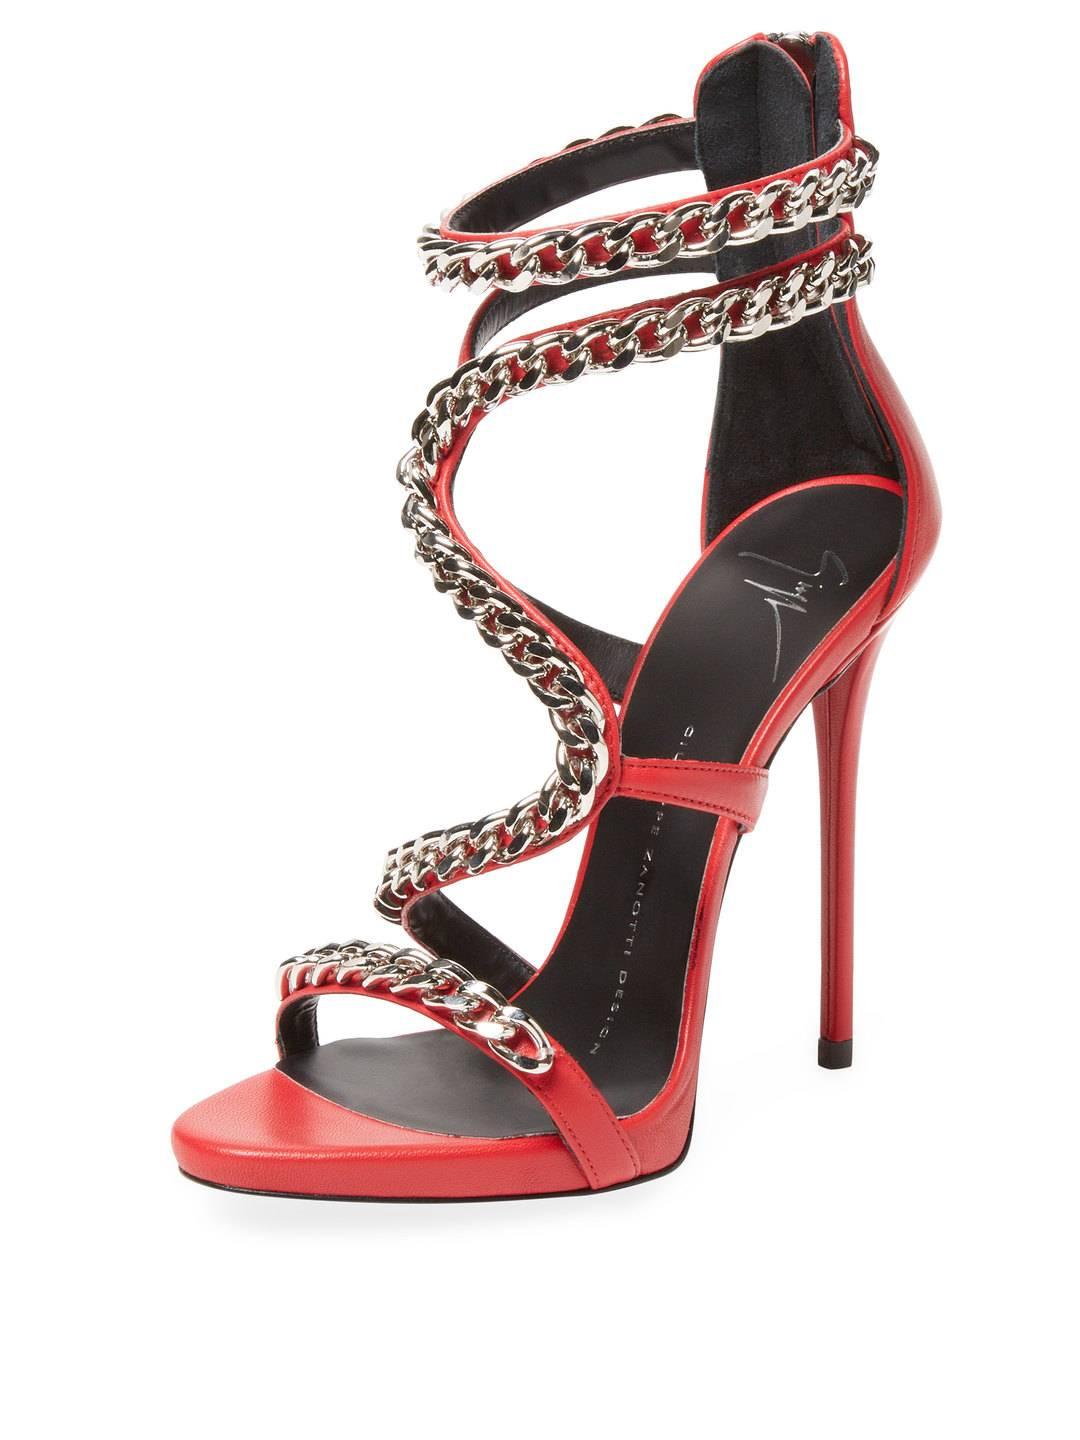 CURATOR'S NOTES

Giuseppe Zanotti New Red Leather Silver Metal Snake Heels Sandals in Box  

Size IT 36
Leather
Metal
Silver tone hardware
Made in Italy
Heel height 4.75